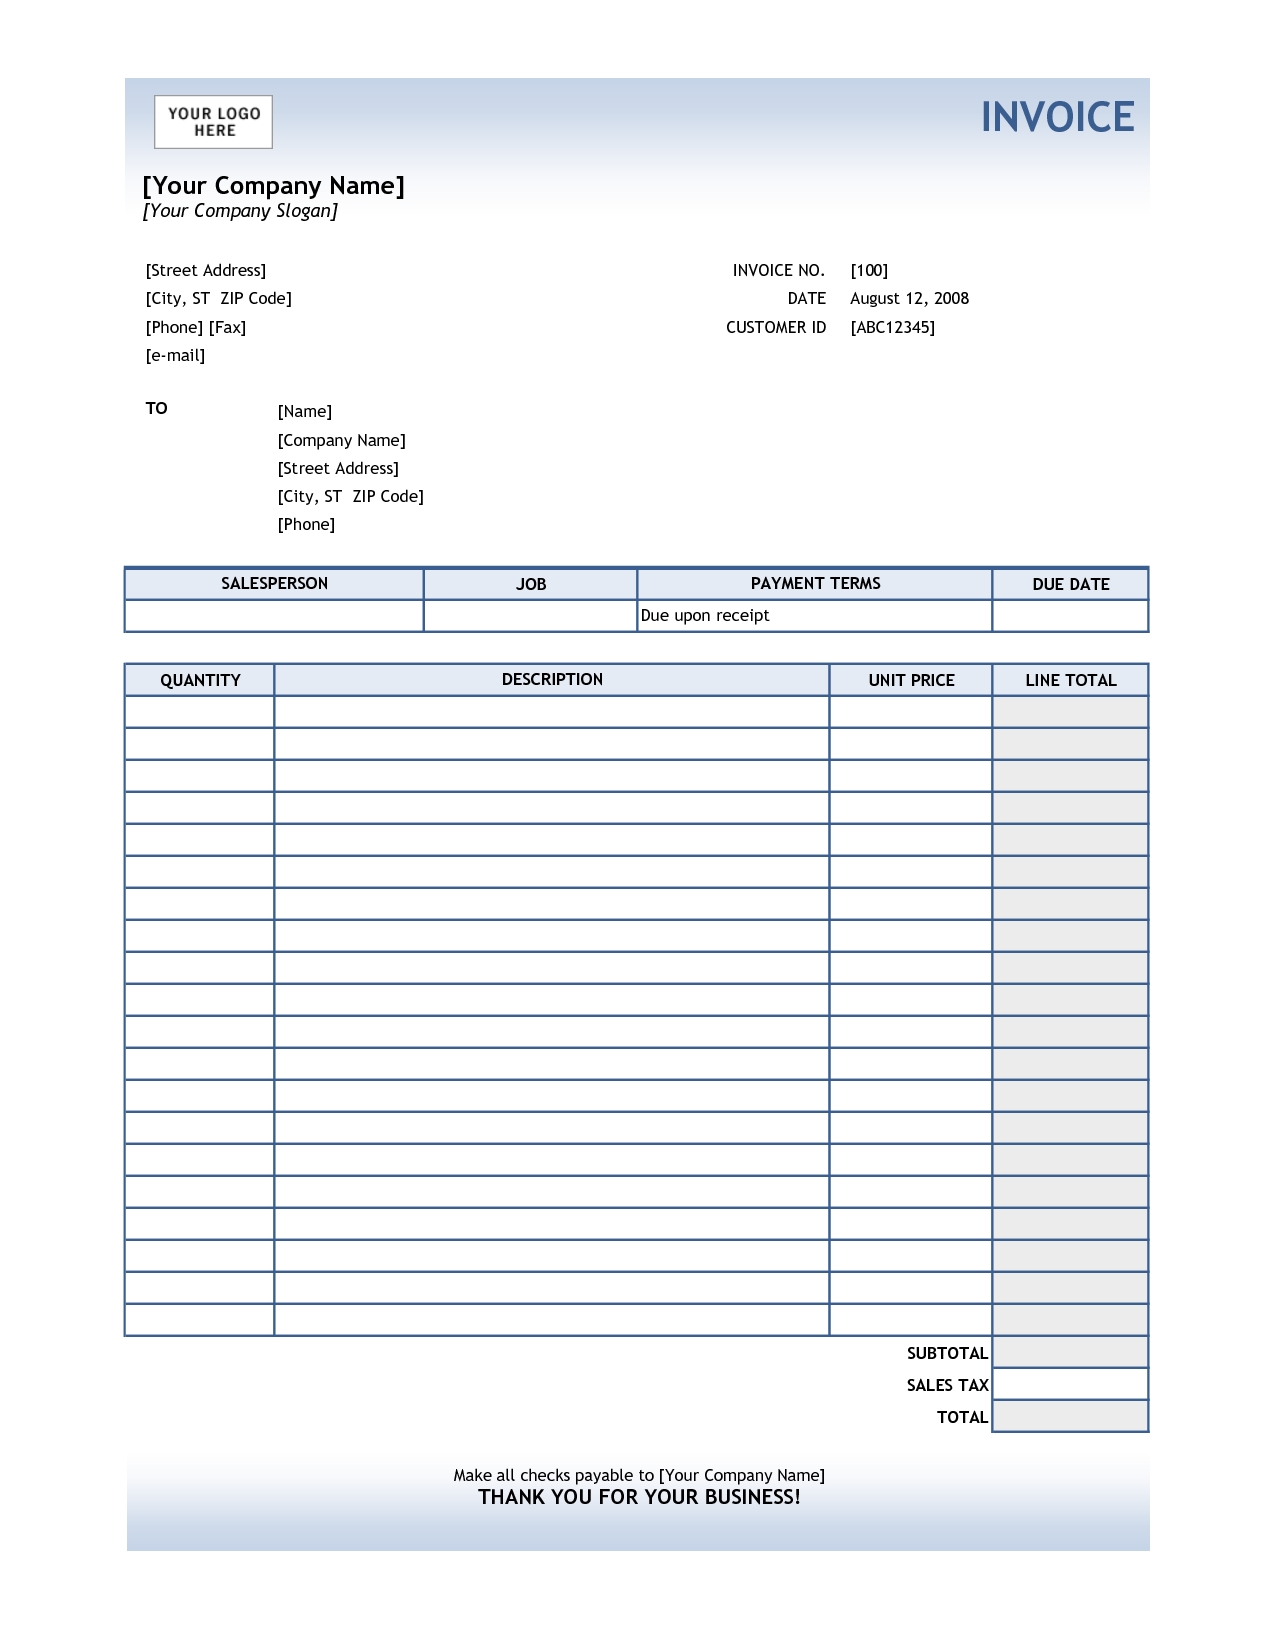 sample invoice template residers sample invoice template excel